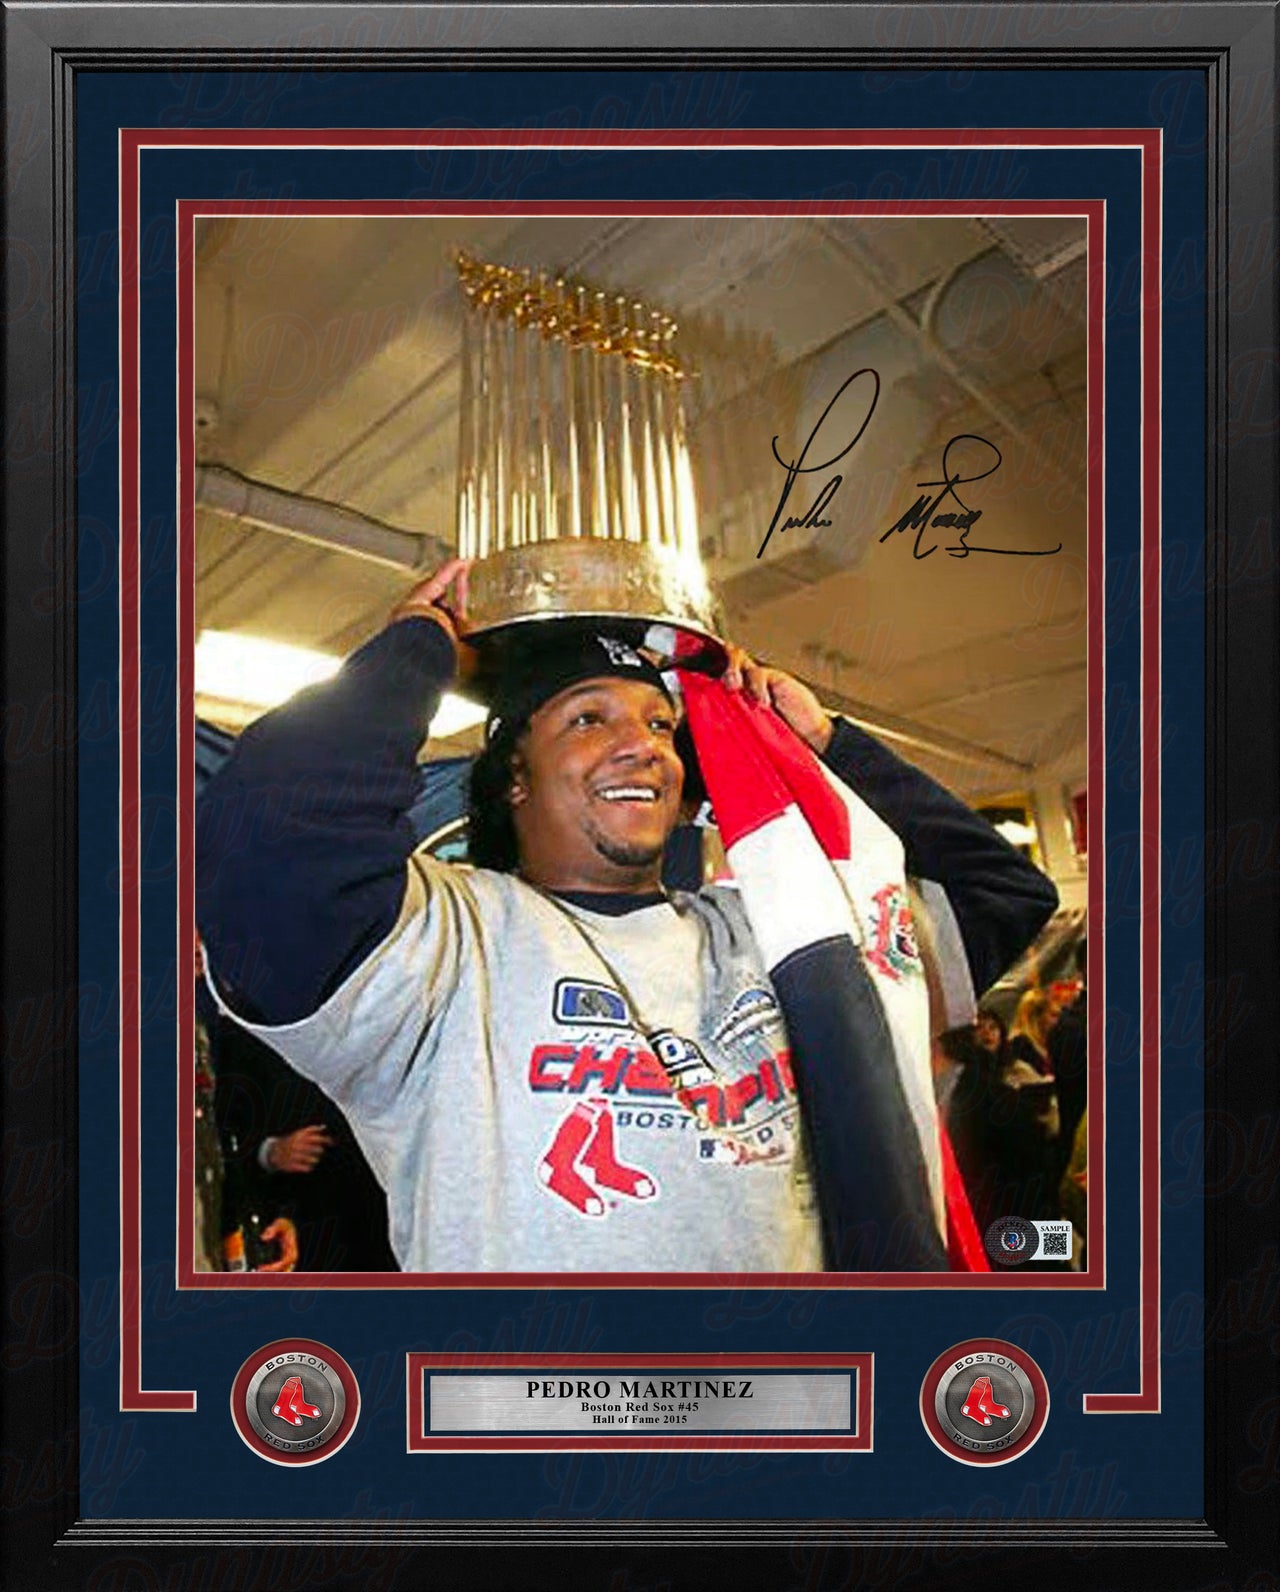 Pedro Martinez 2004 WS Trophy Boston Red Sox Autographed Framed Photo - Beckett Certified - Dynasty Sports & Framing 